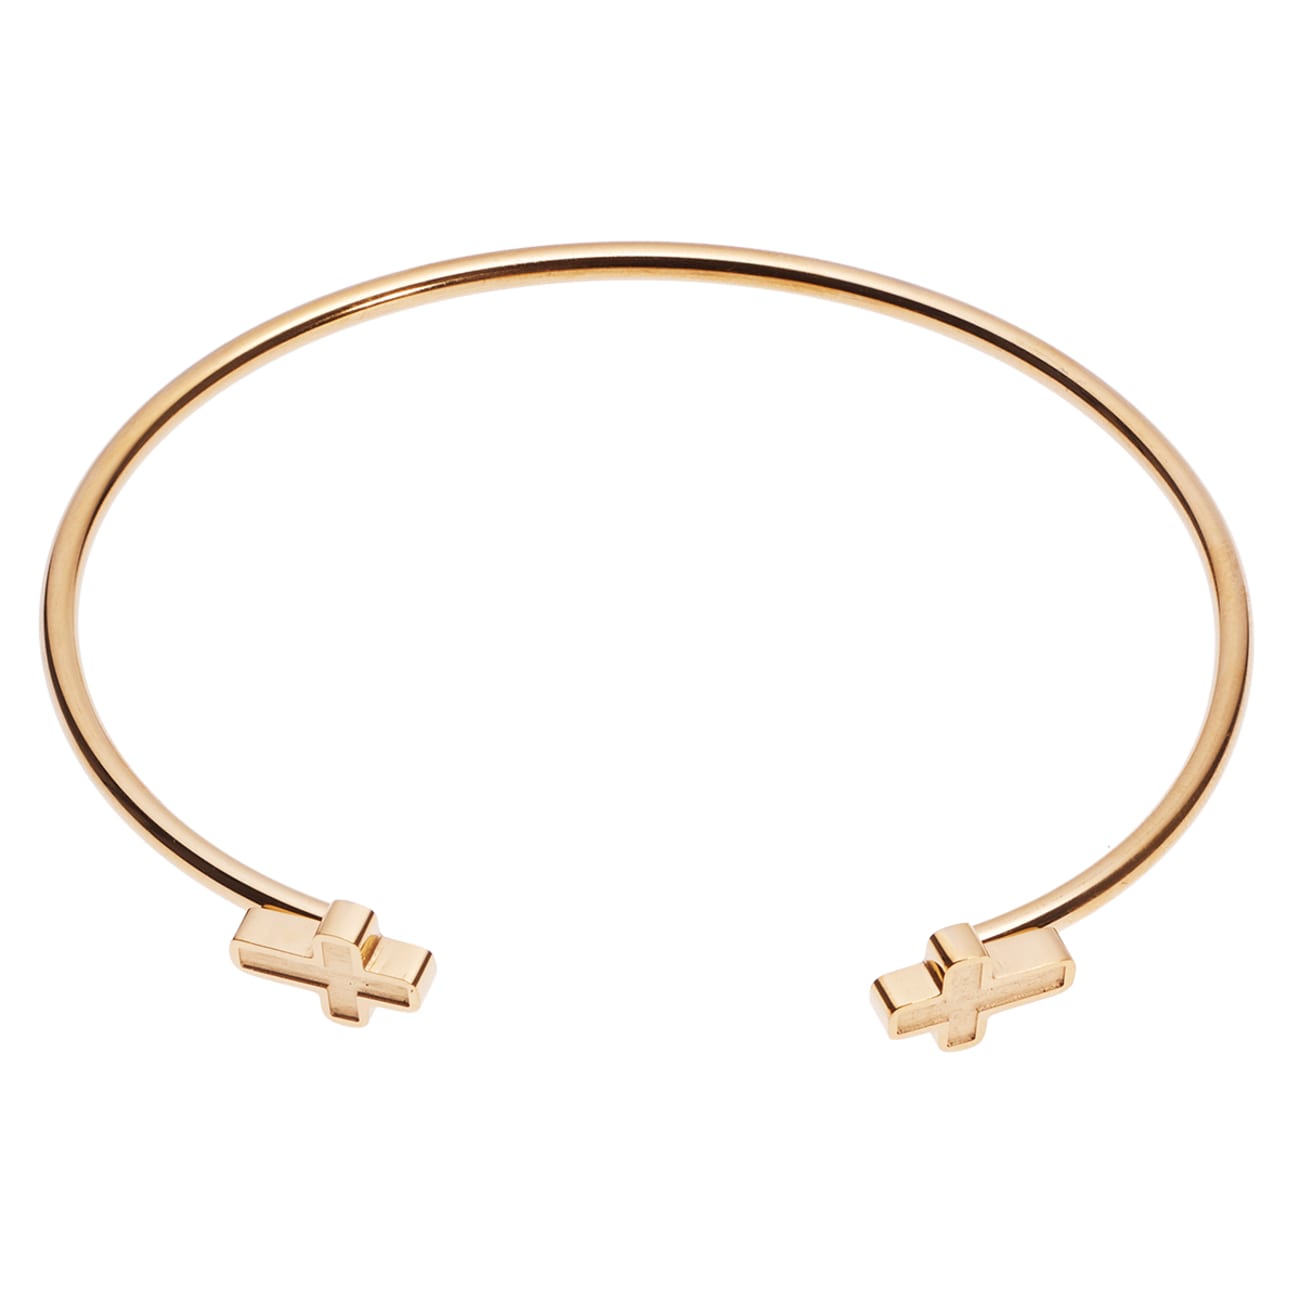 Bracelet: Open Cuff Bracelet With Cross Ends, 316 Stainless Steel With 14K Gold Plating Jewellery